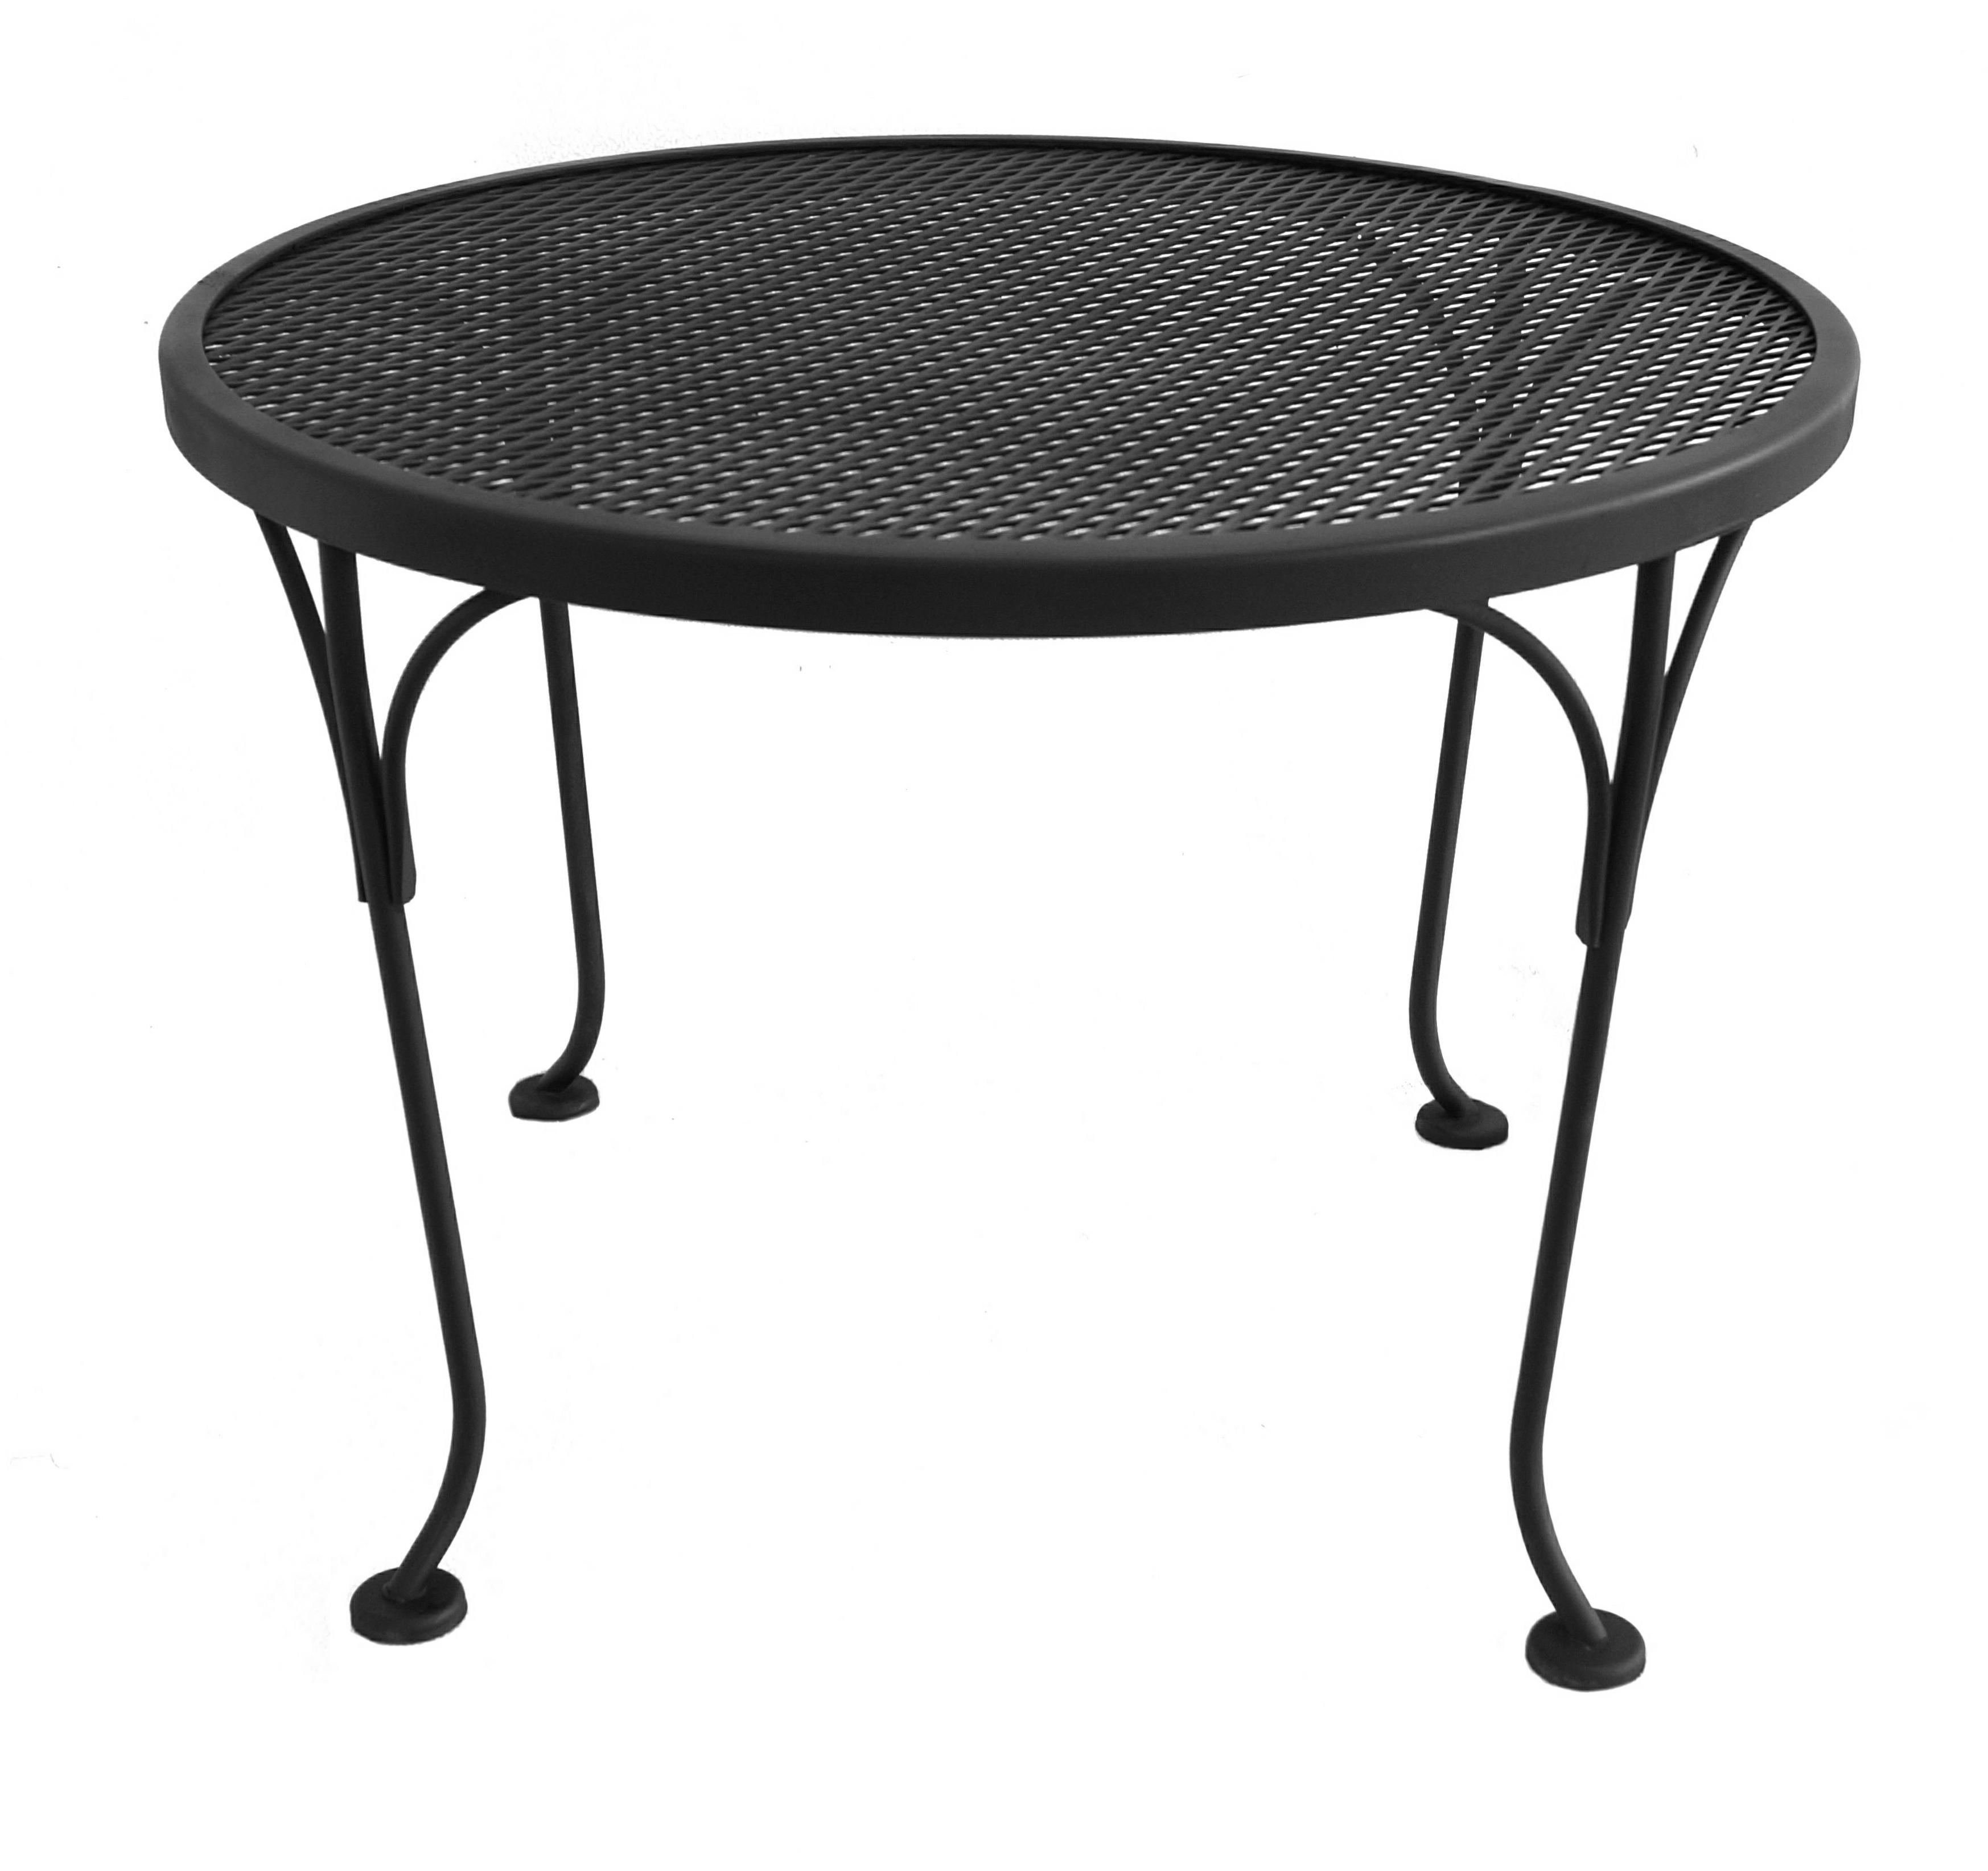 Russell Woodard Furniture Round Black Wrought Iron Patio Coffee or Side Table often seen along with his Sculptura line chairs and settees